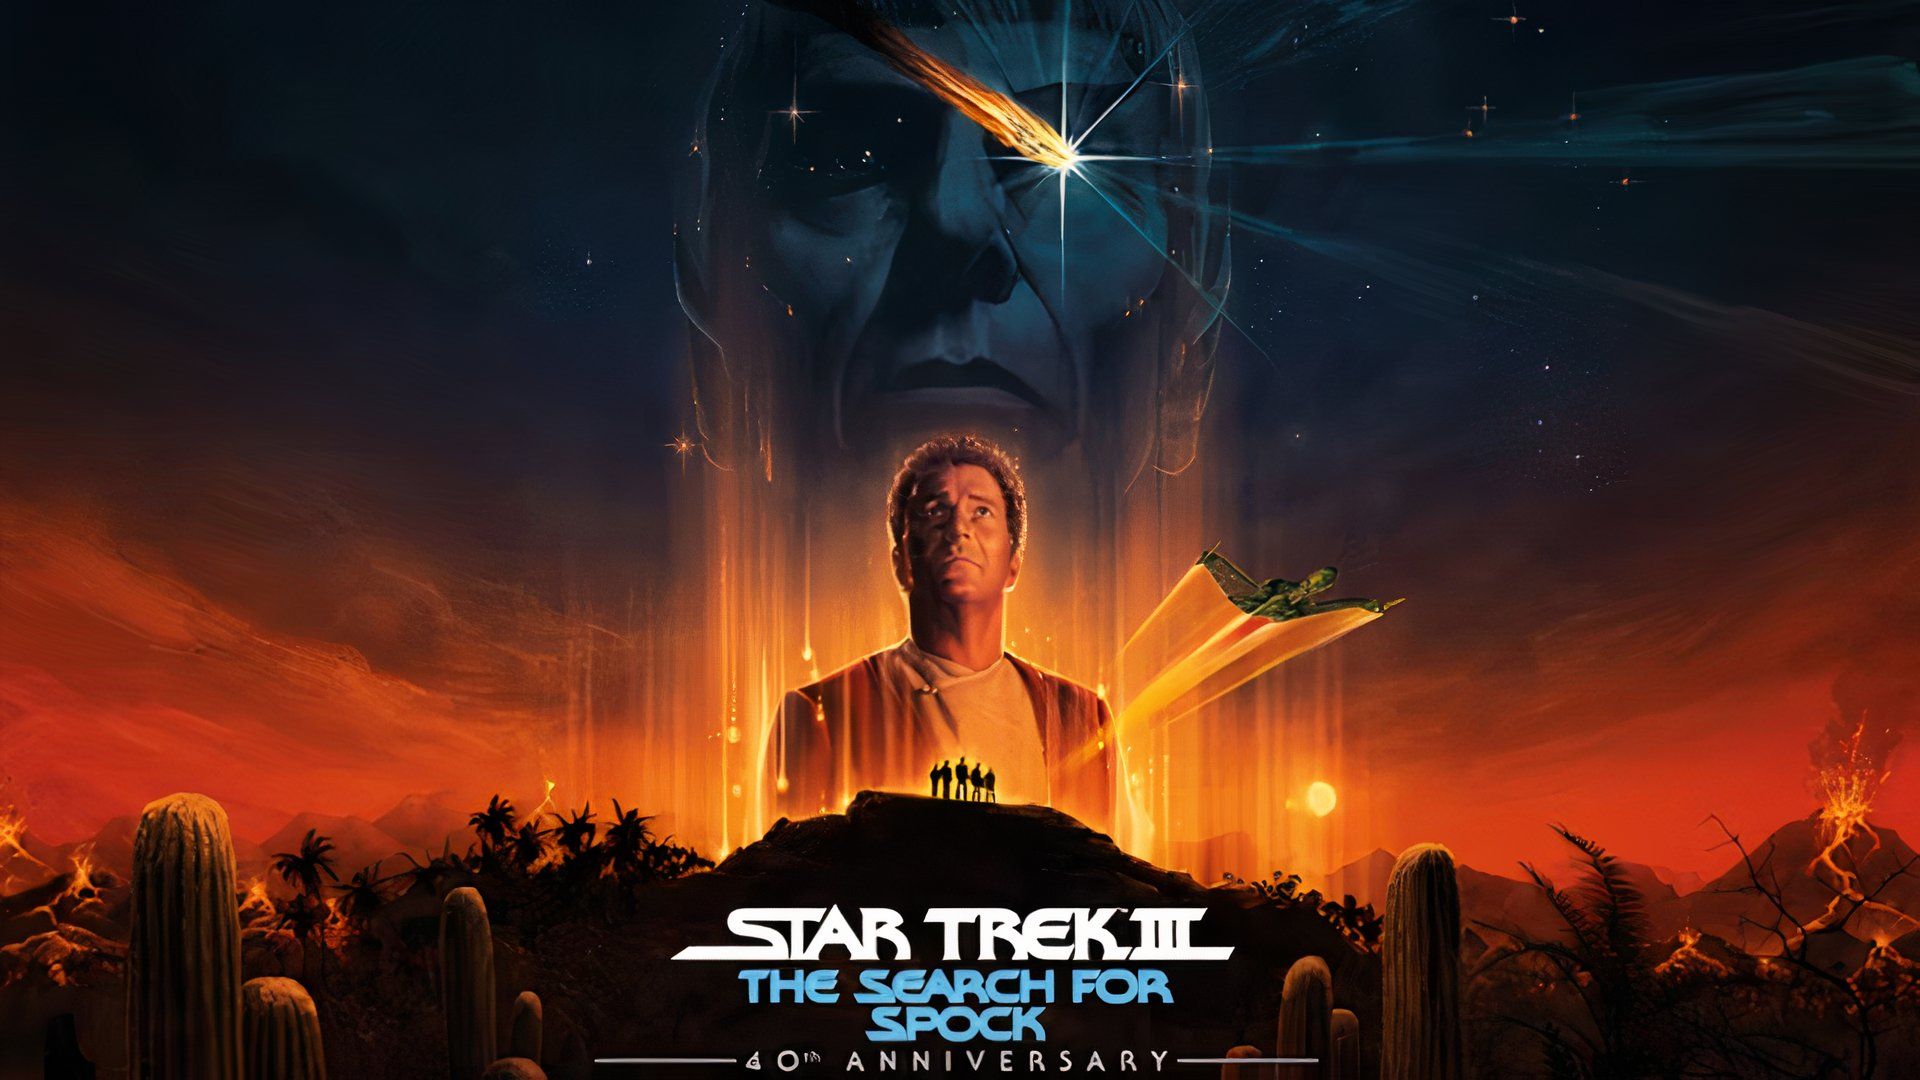 Star Trek III The Search for Spock 40th anniversary screenings